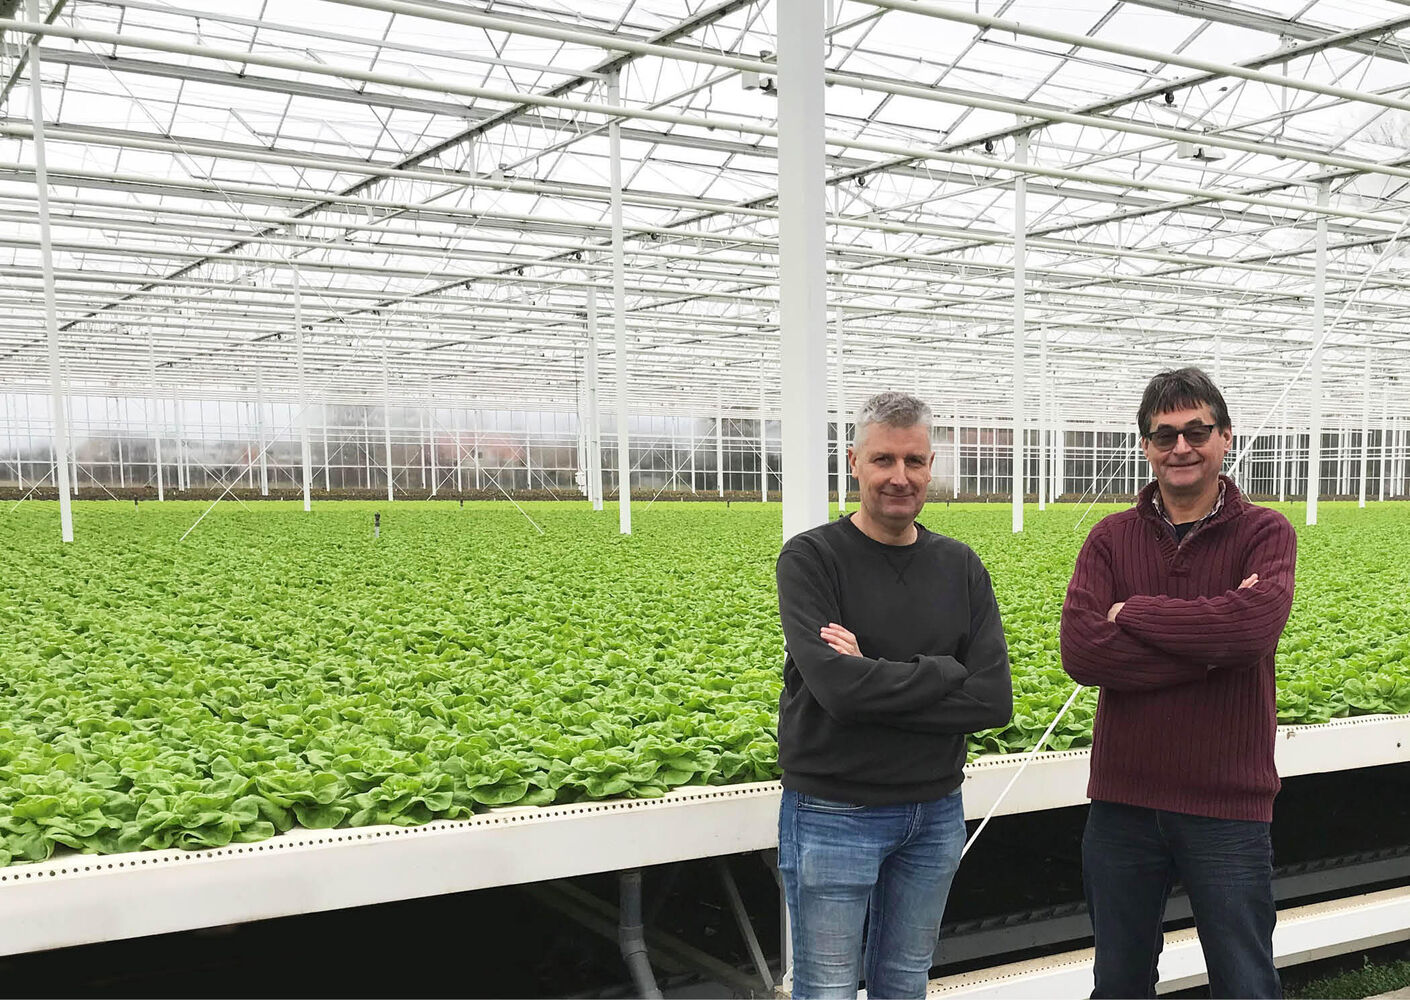 Making a lettuce greenhouse more sustainable using water-cooled LED fixtures